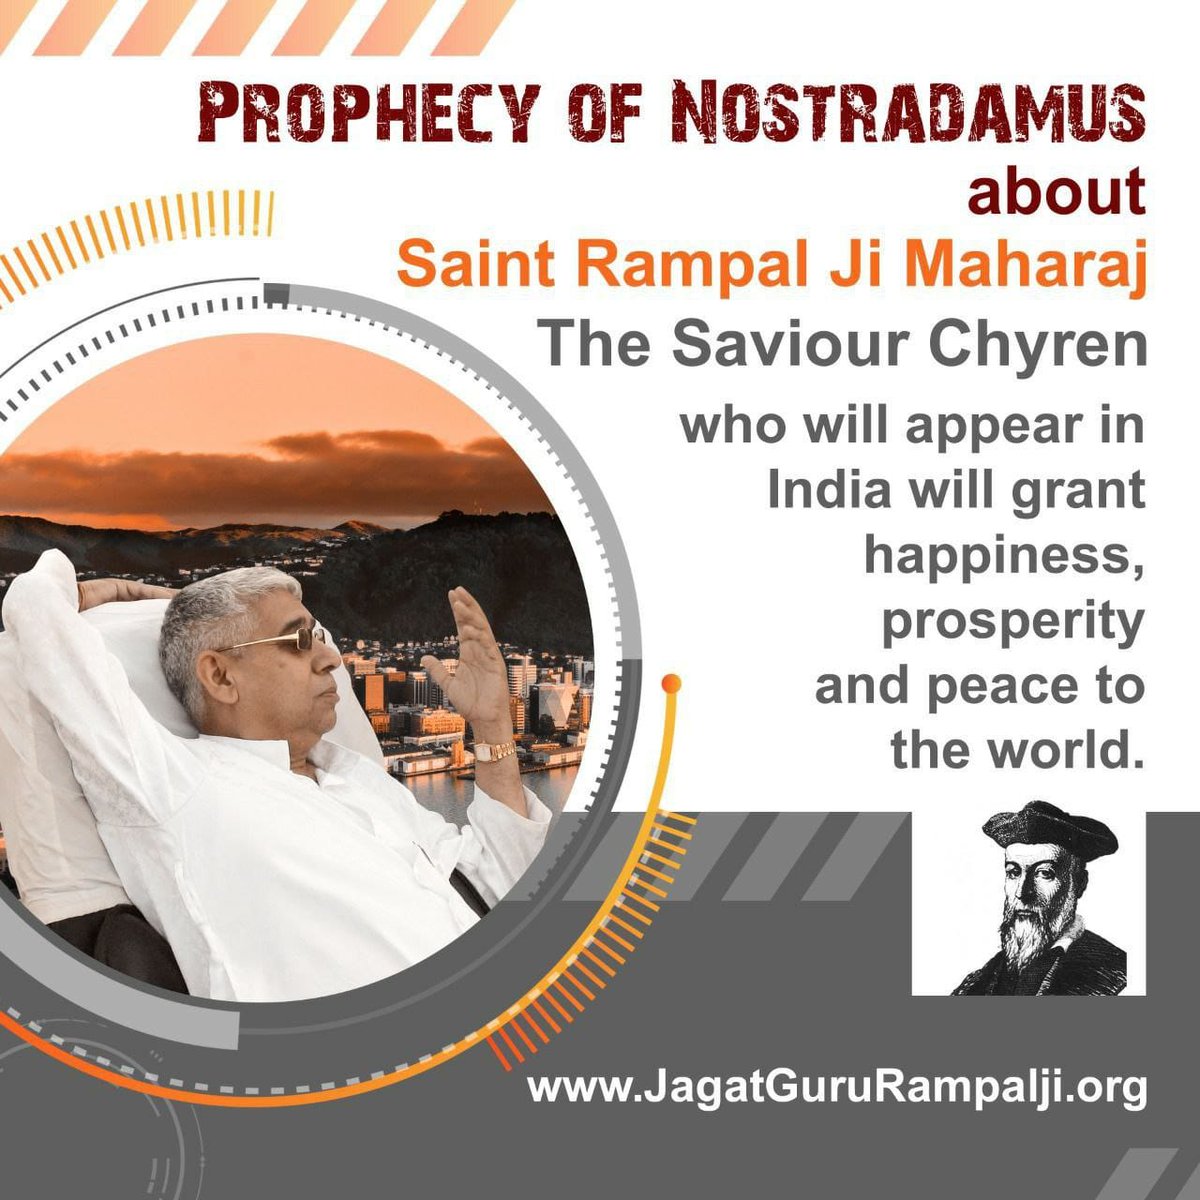 #GodMorningThursday PROPHECY OF NOSTRADAMUS about Saint Rampal Ji Maharaj The Saviour Chyren who will appear in India will grant happiness, prosperity and peace to the world.